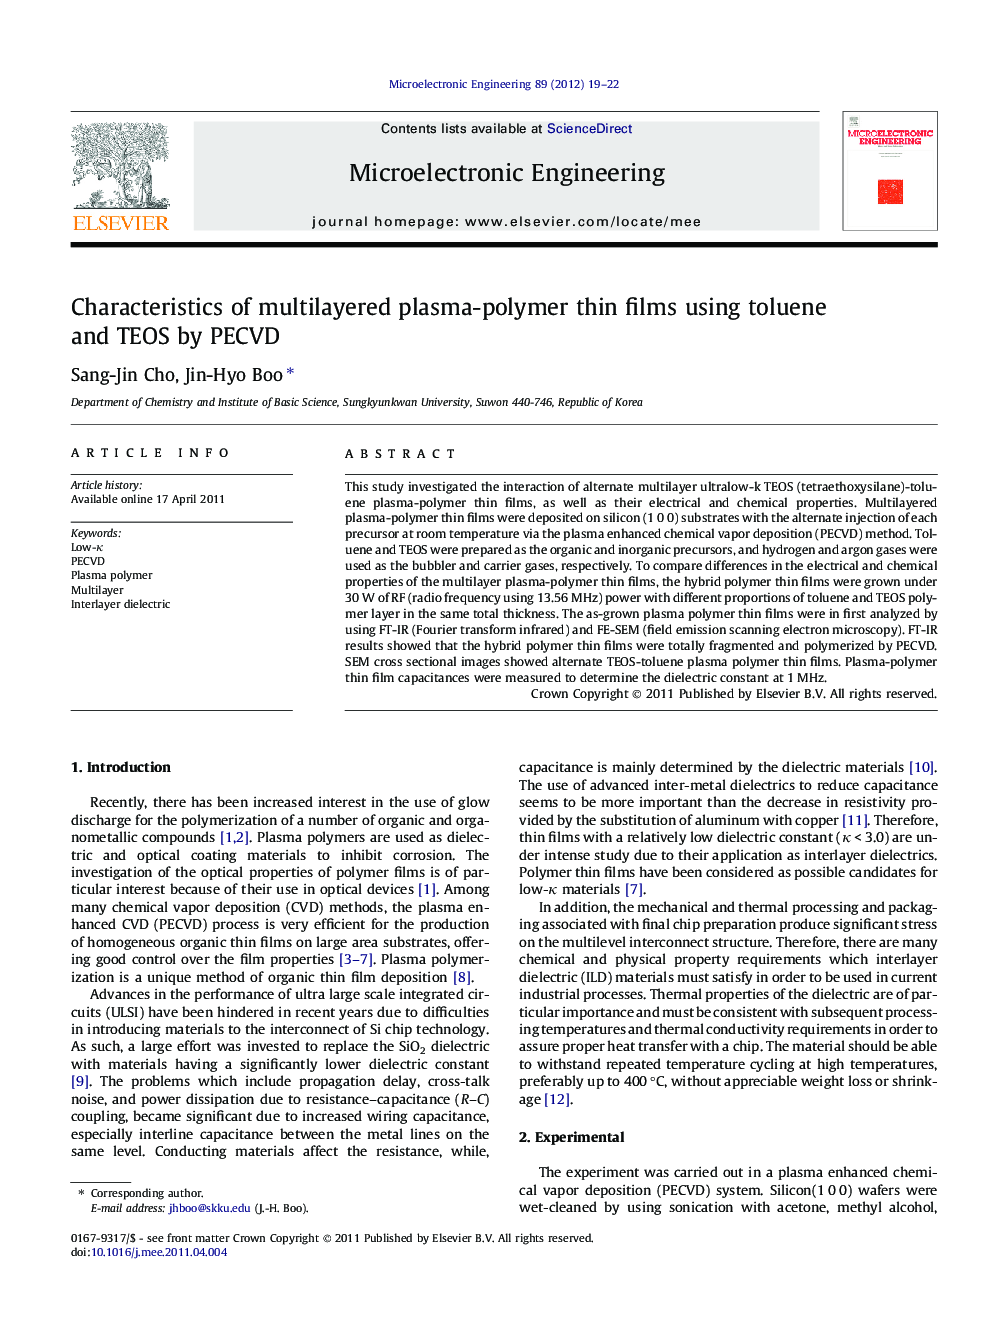 Characteristics of multilayered plasma-polymer thin films using toluene and TEOS by PECVD